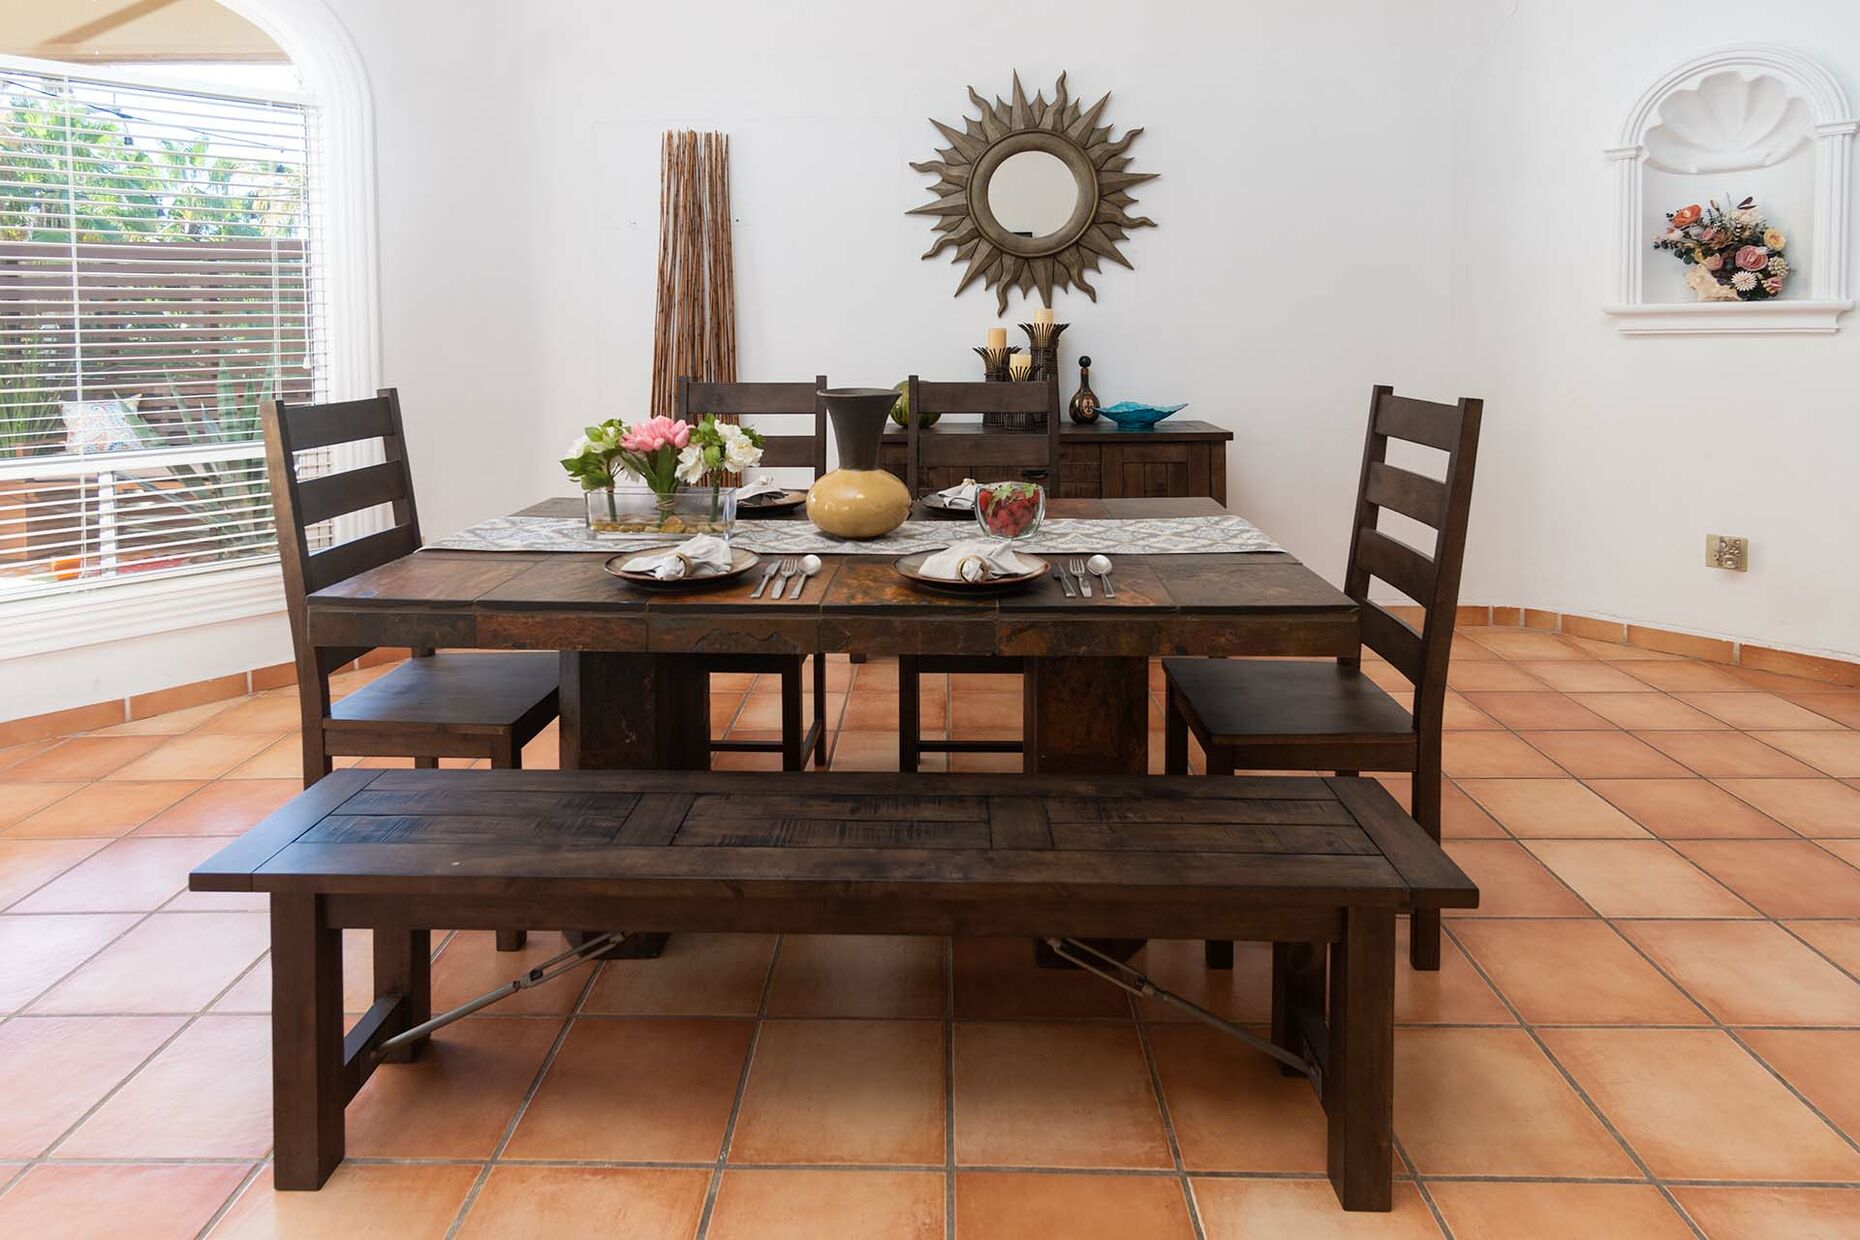 close up of the wooden dining table